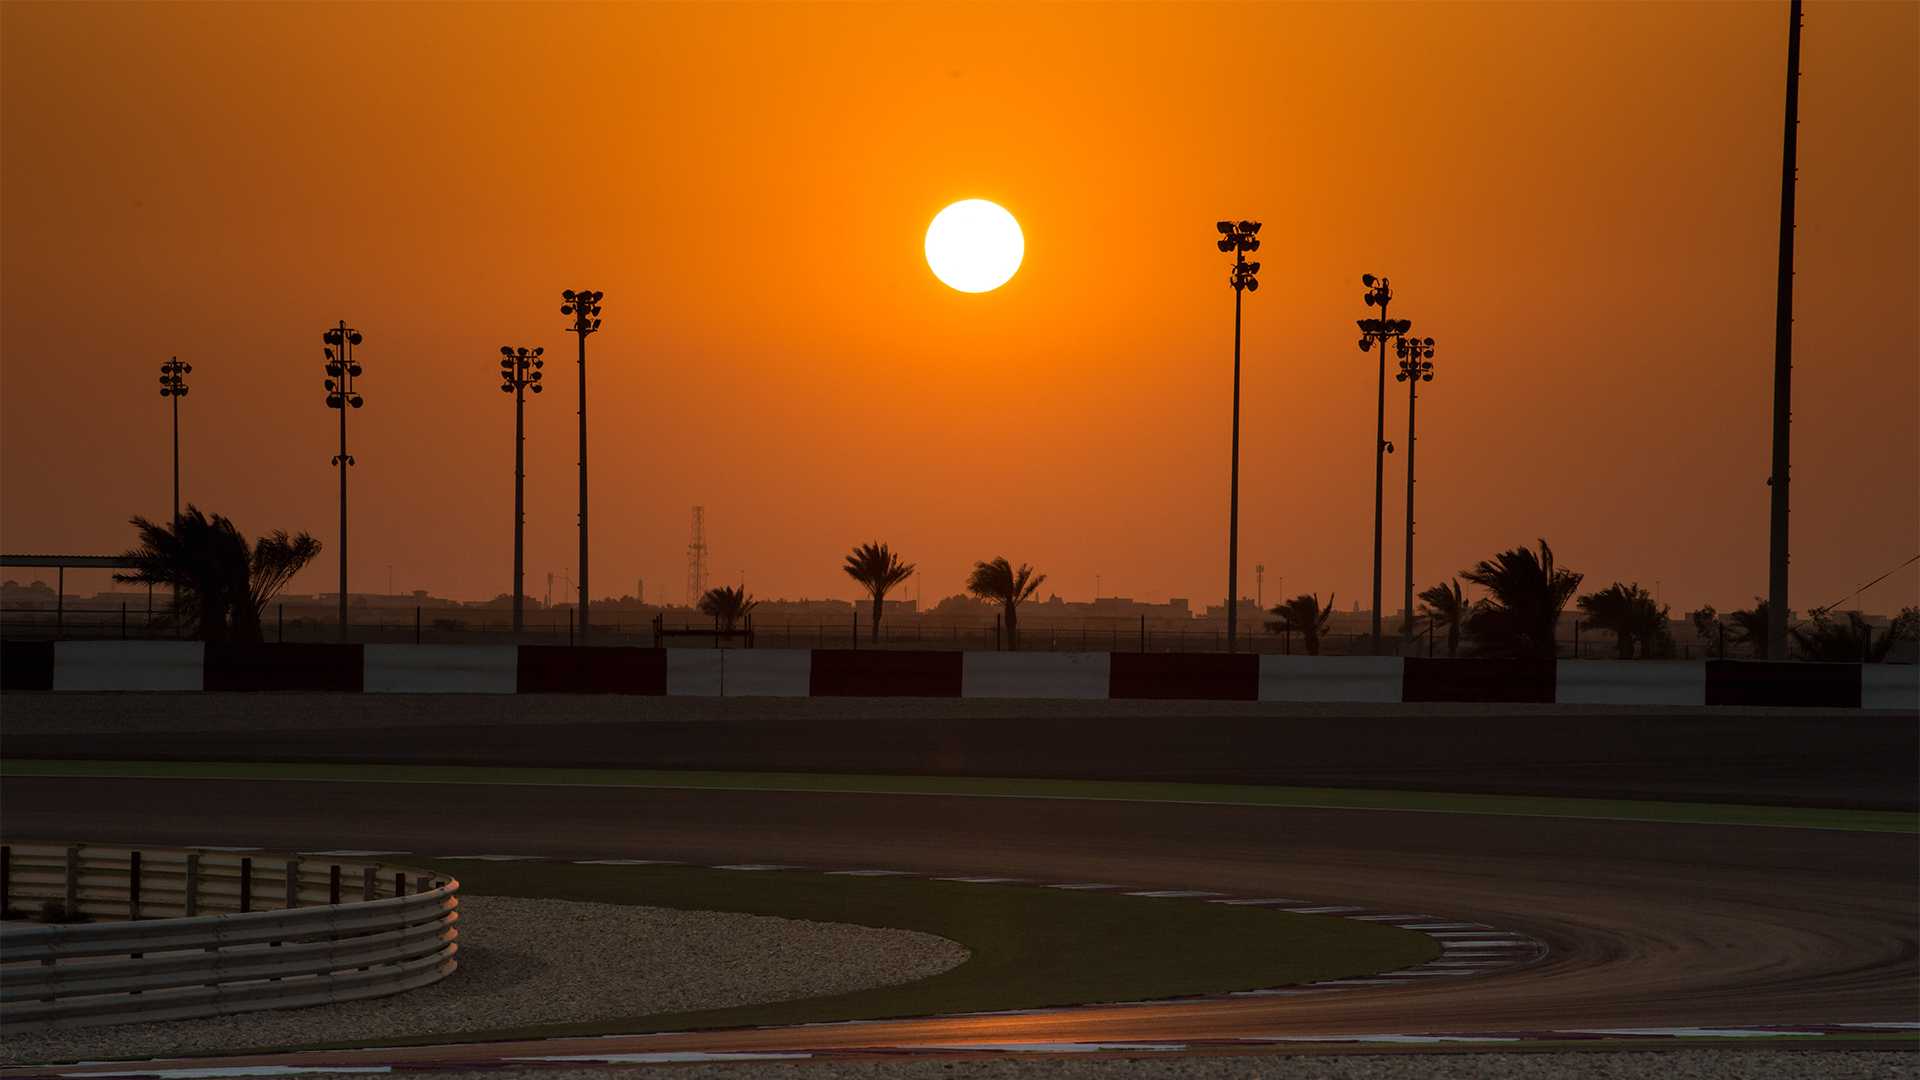 Sun down, lights out: battle commences in Qatar